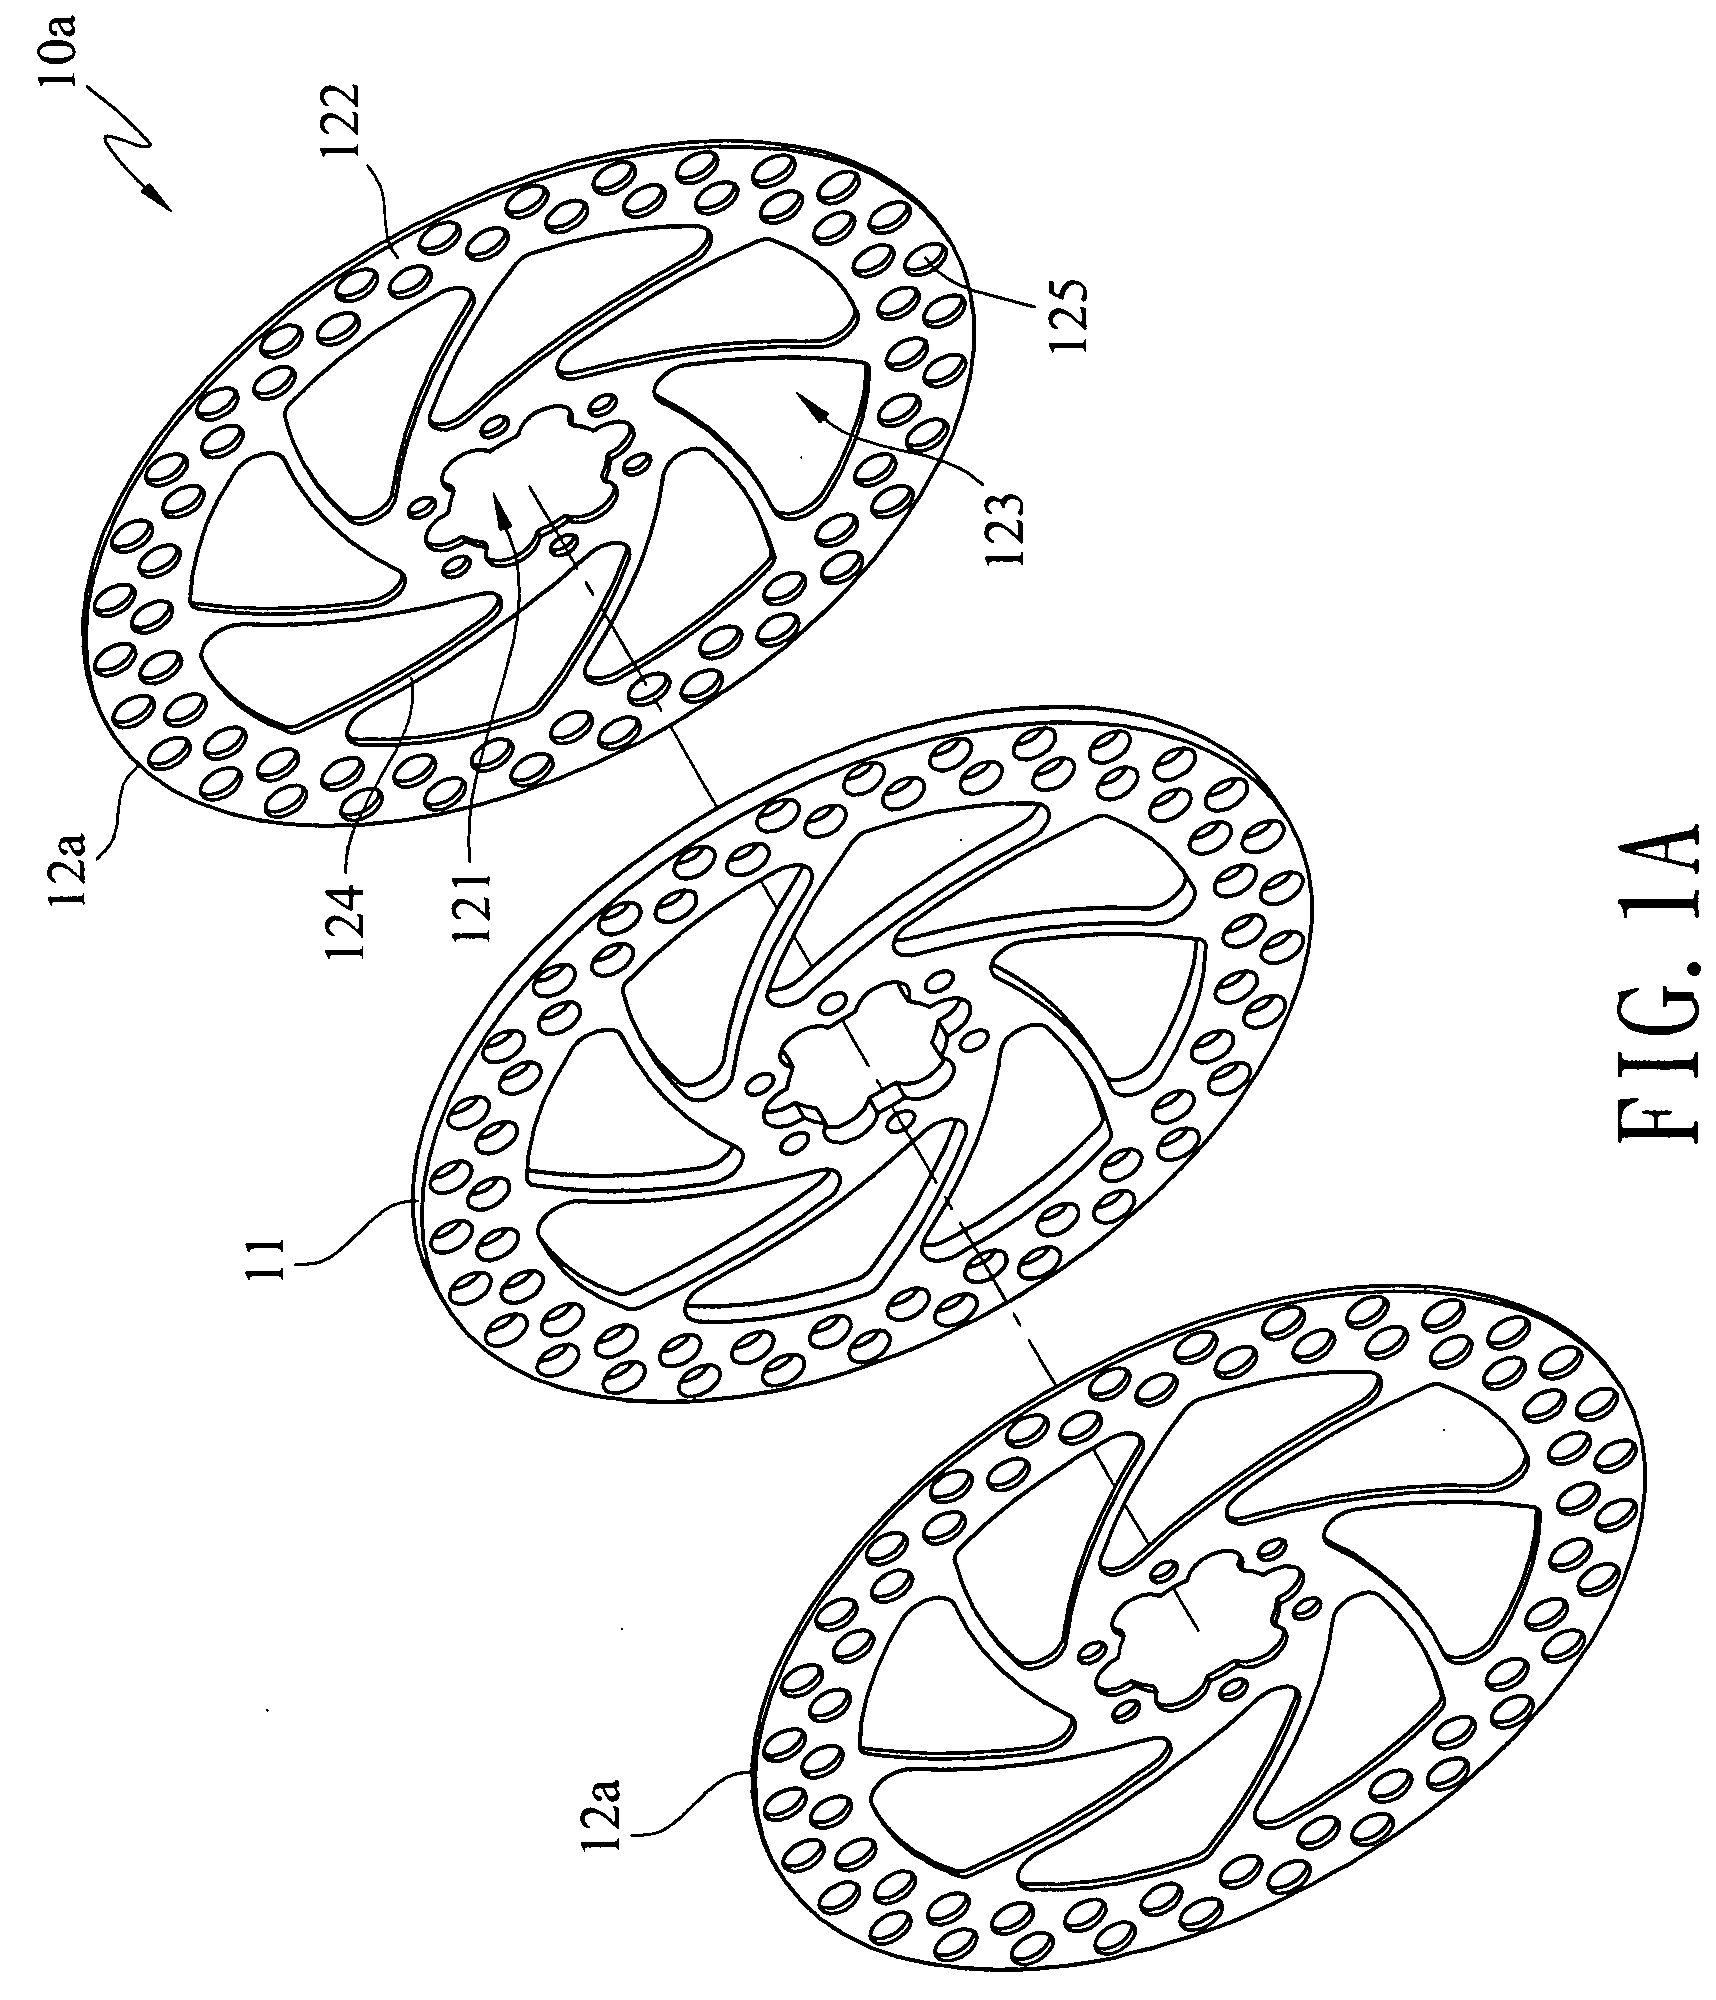 Brake disc structure with composite materials